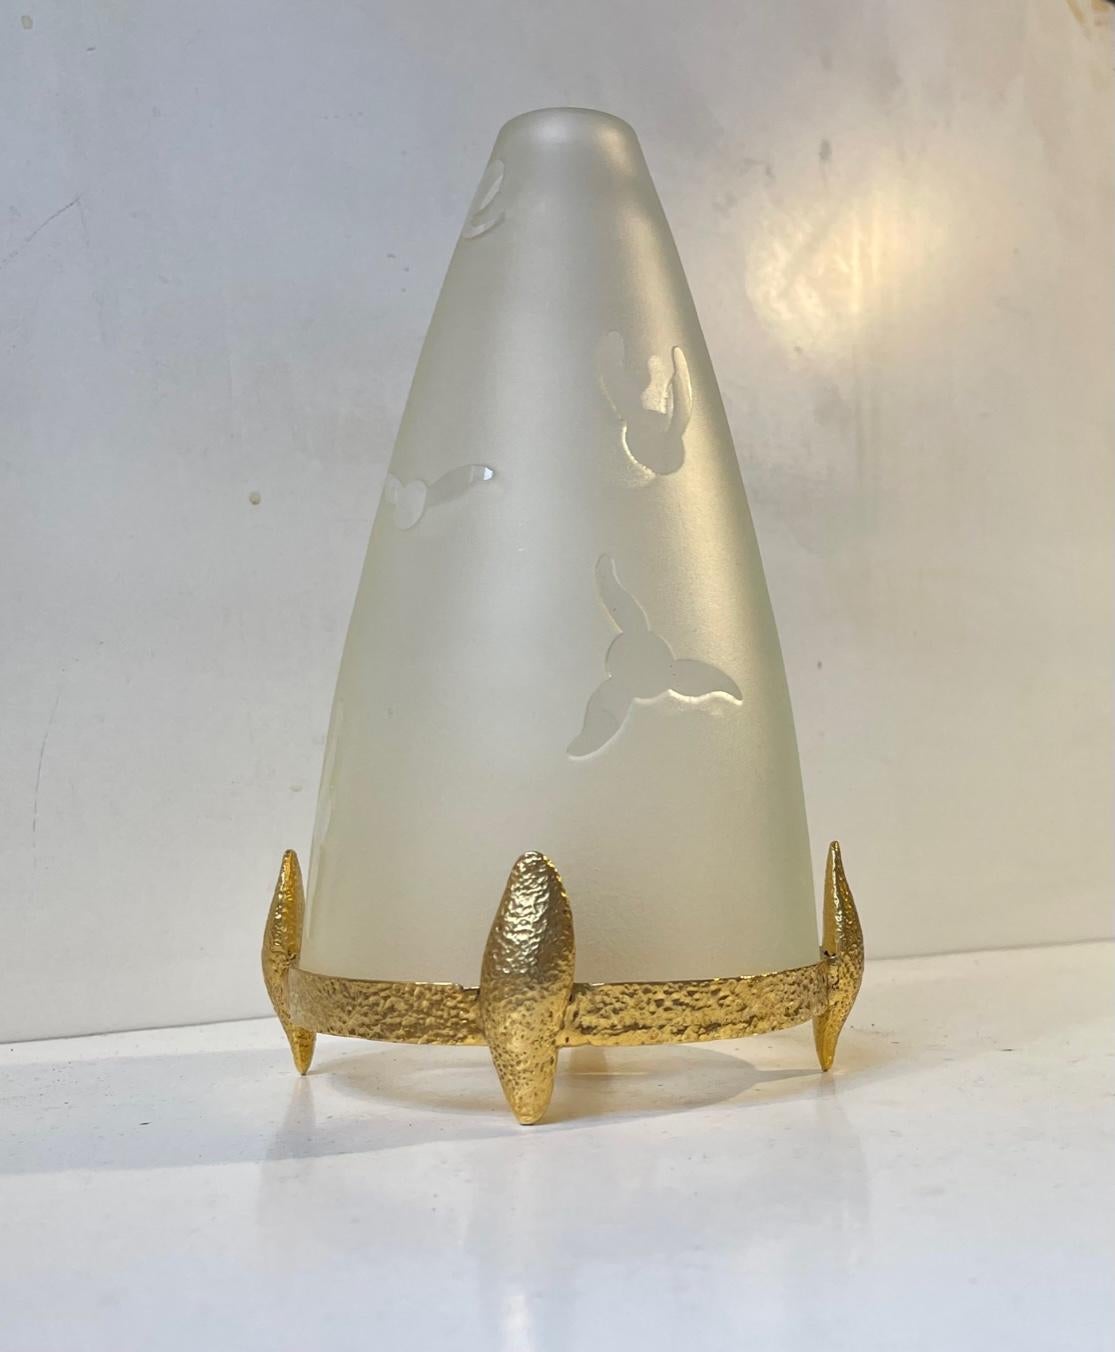 A French candle table lamp featuring a Tristan base in gilded brass and a thick glass shade decorated with birds. Imprint/marking from unidentified French Work shop. Signed made in France as well. It can be fitted with regular sized candles, ball